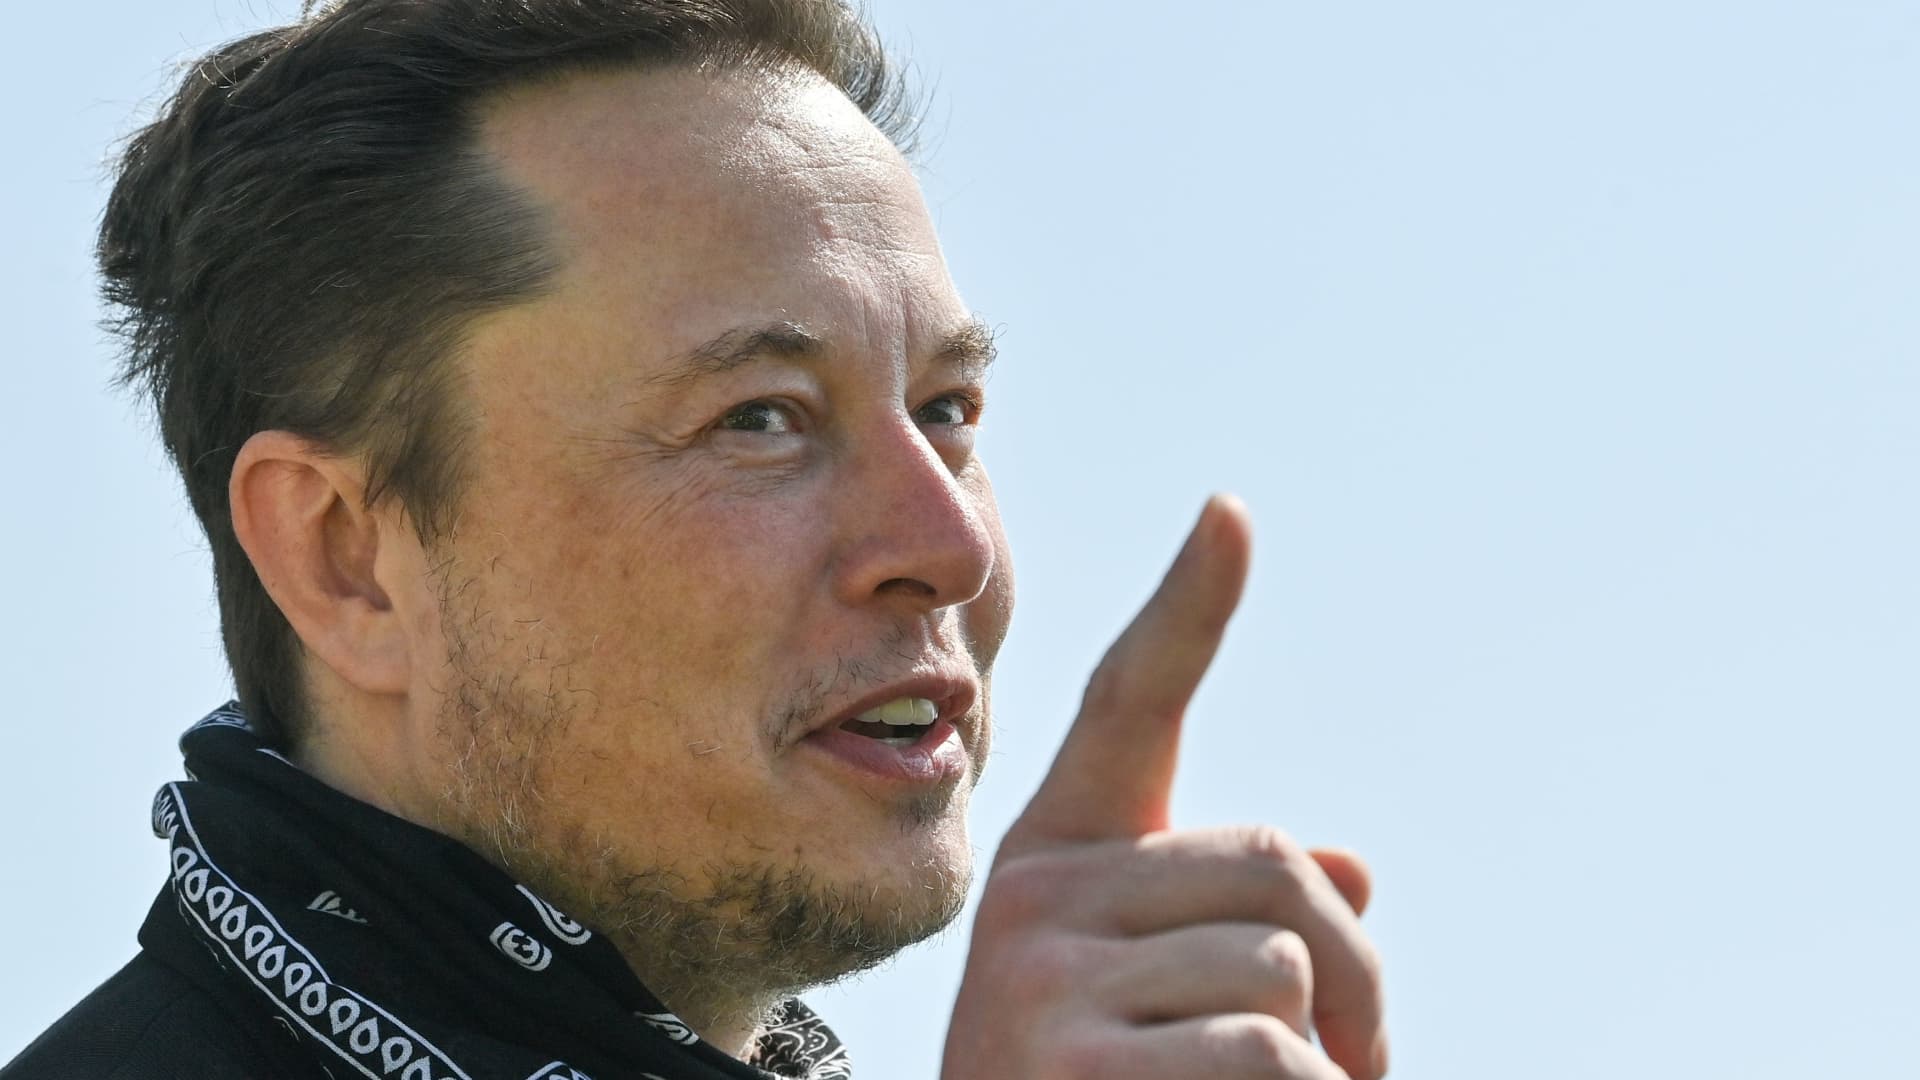 Elon Musk says he has no plans to donate to GOP super PACs